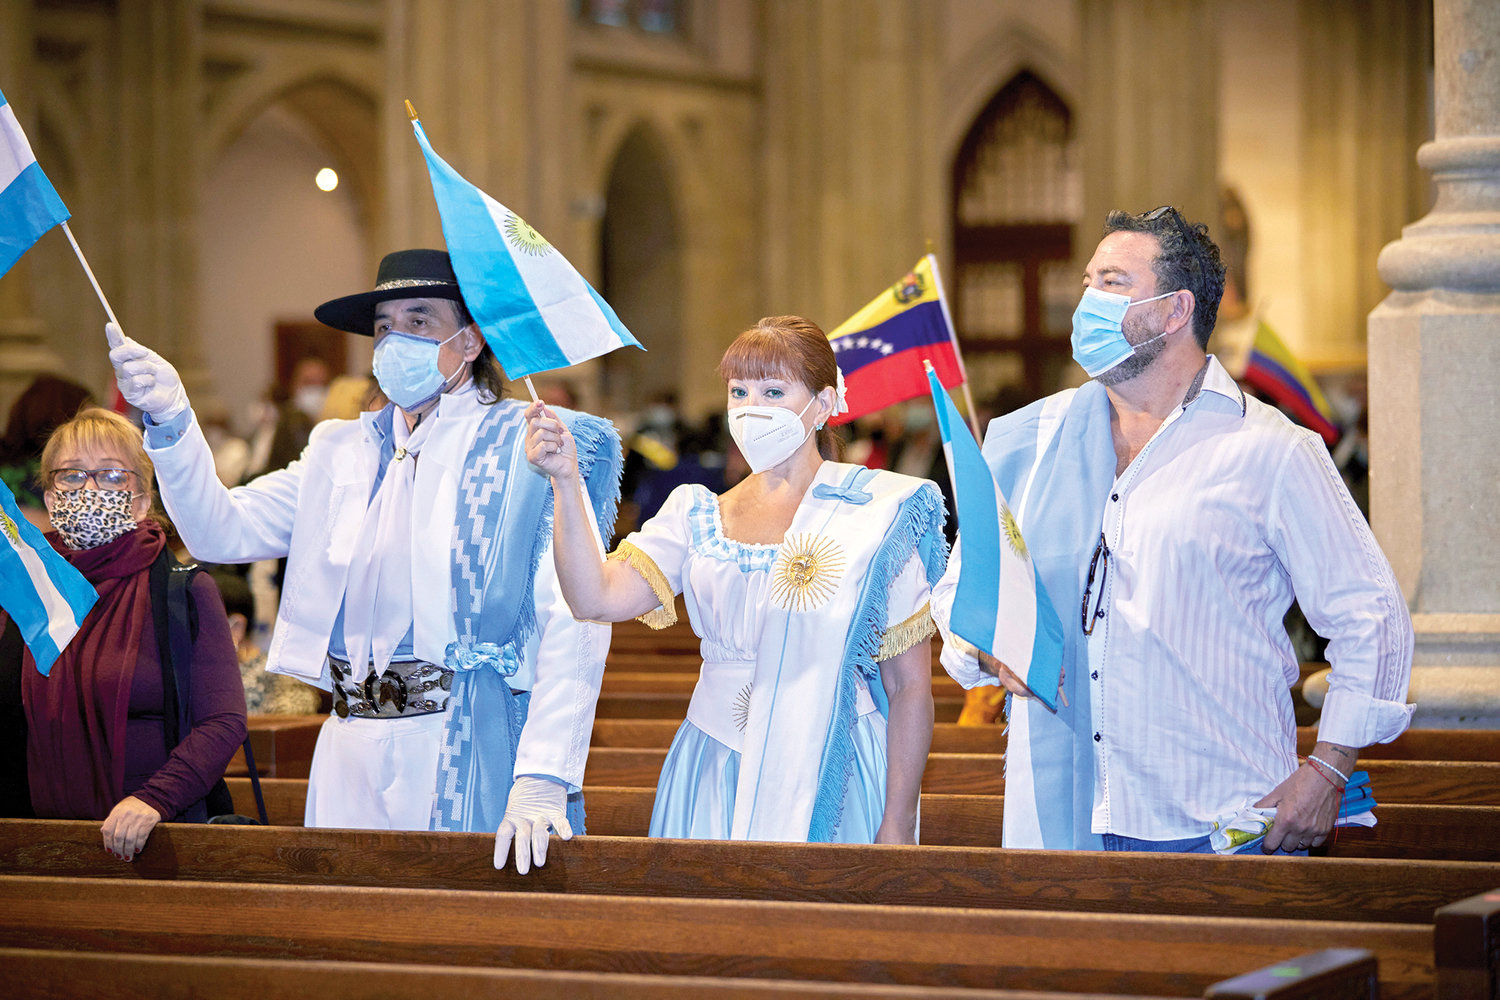 People are dressed in Argentinian folklore outfits. The Mass of All Nations is a Marian and cultural celebration focusing on the different ways that Mary is honored in Hispanic/Latino countries.